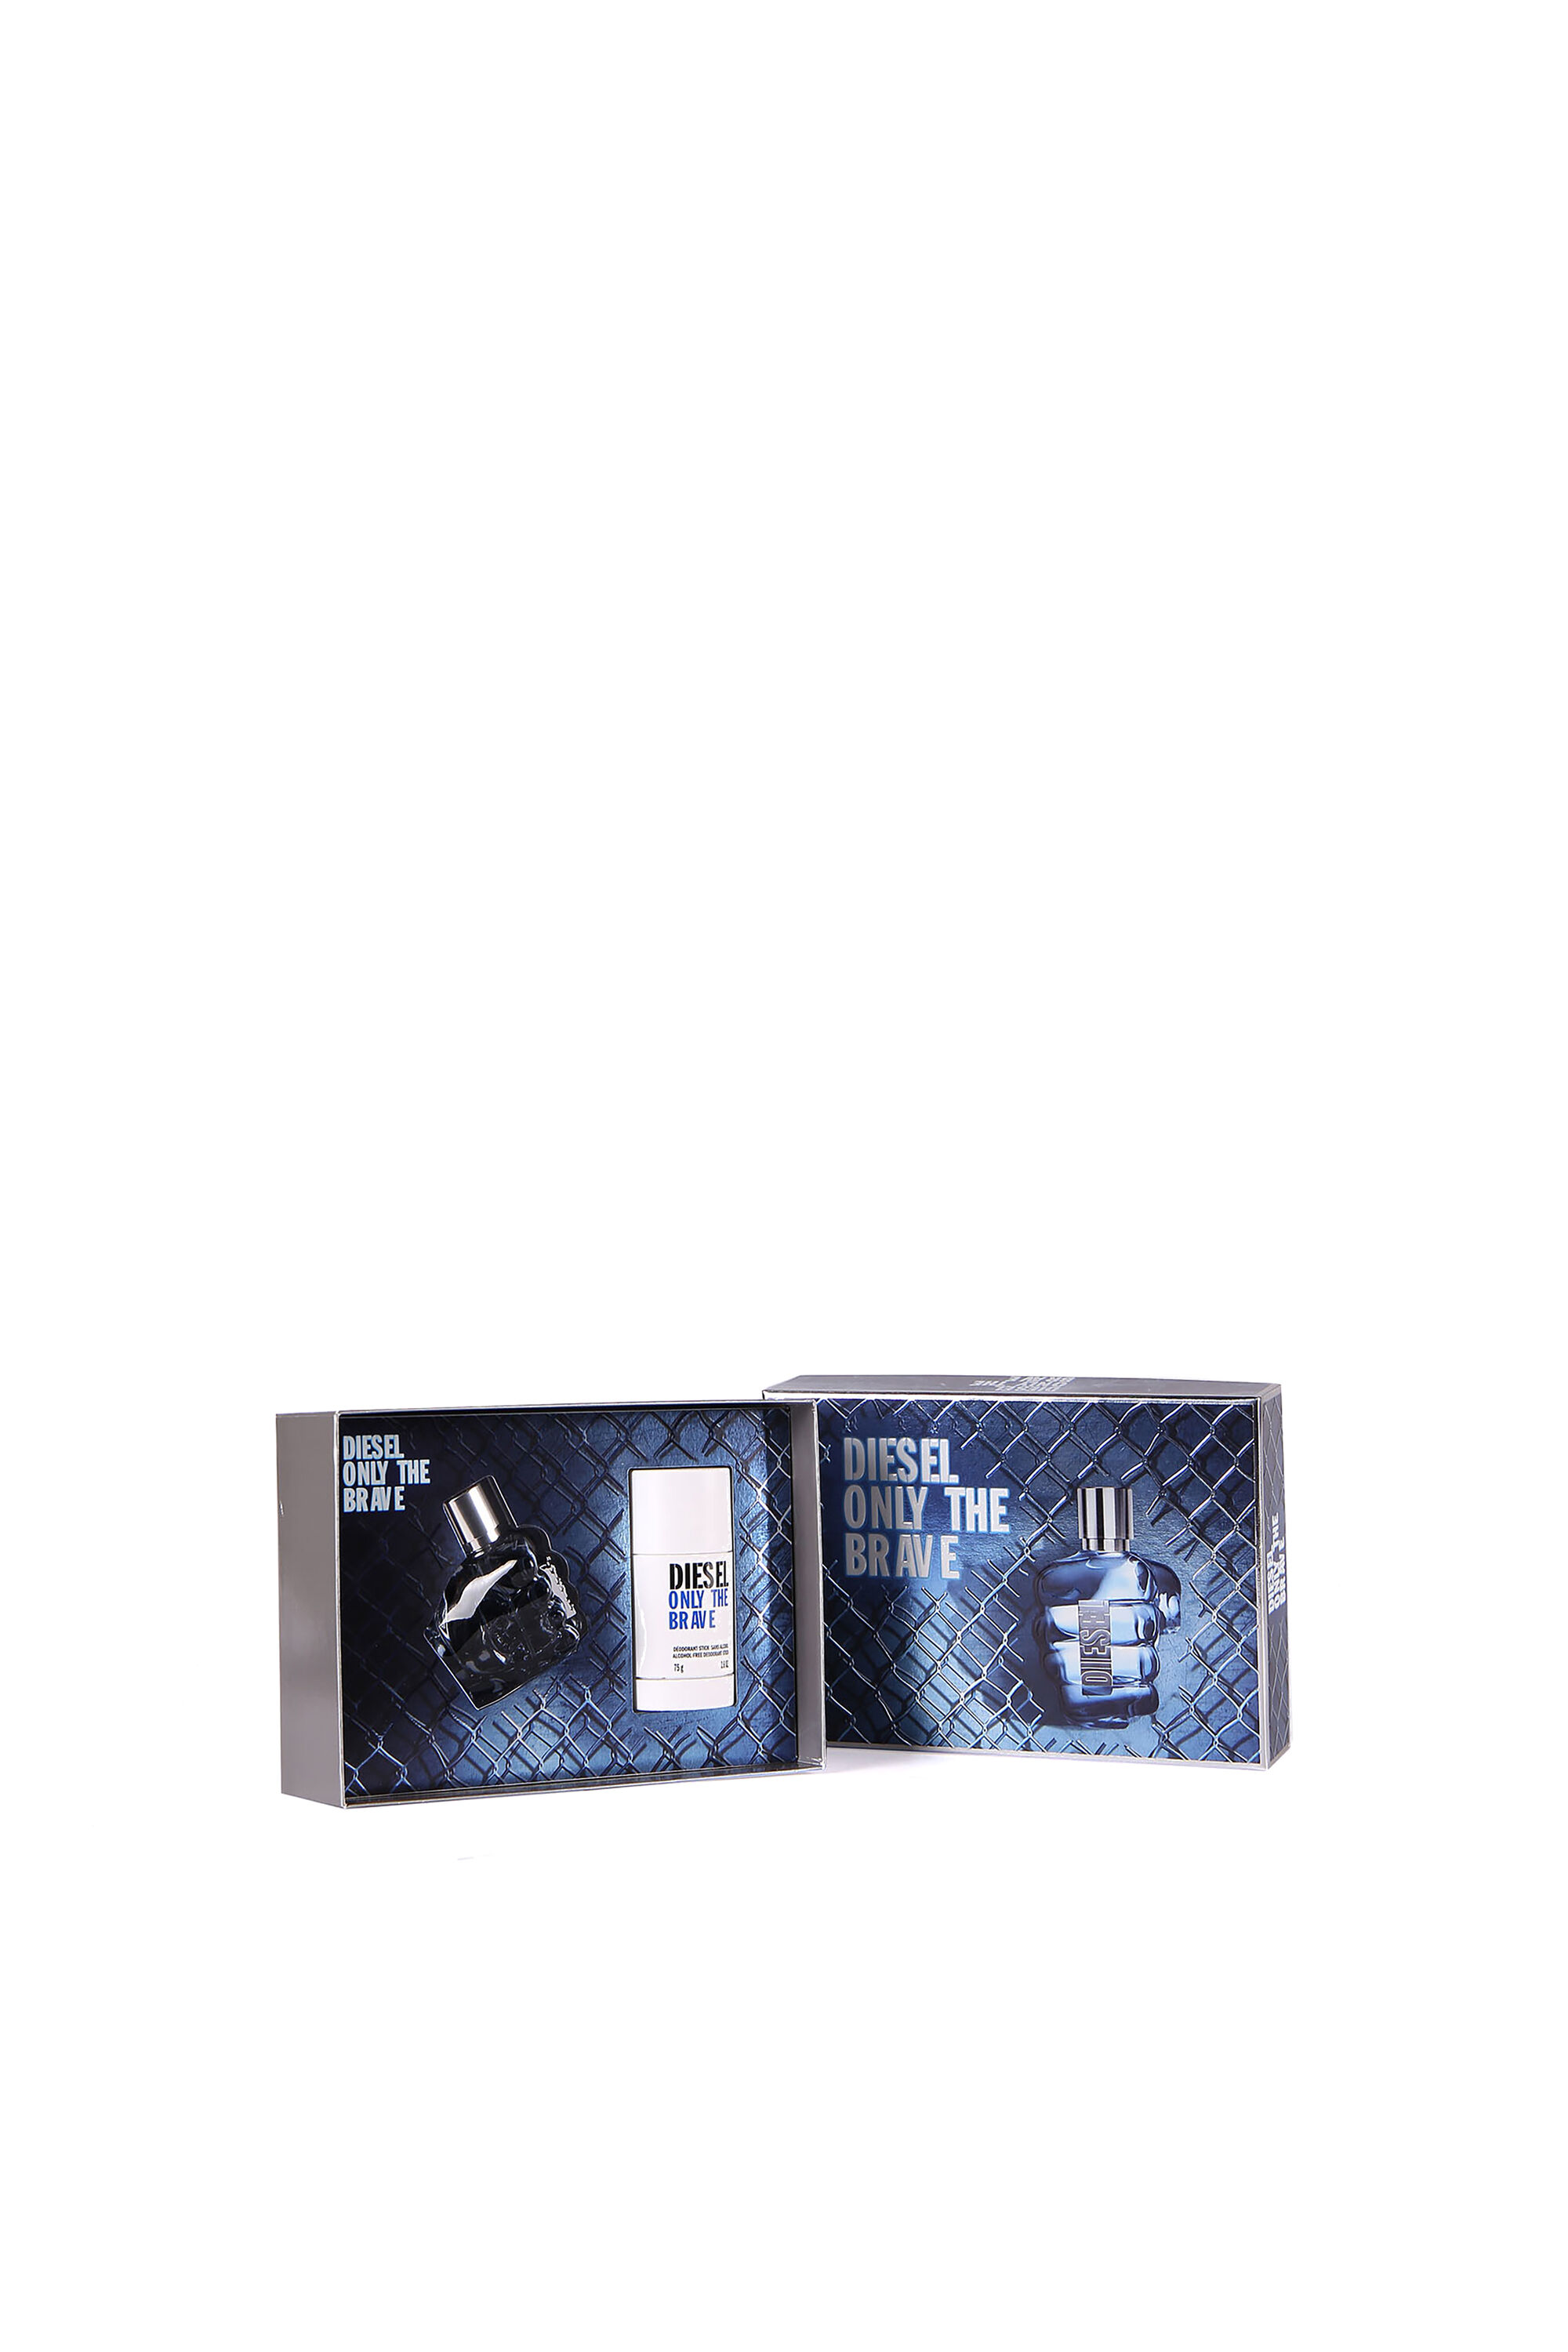 Diesel - ONLY THE BRAVE 35ML GIFT SET,  - Image 2